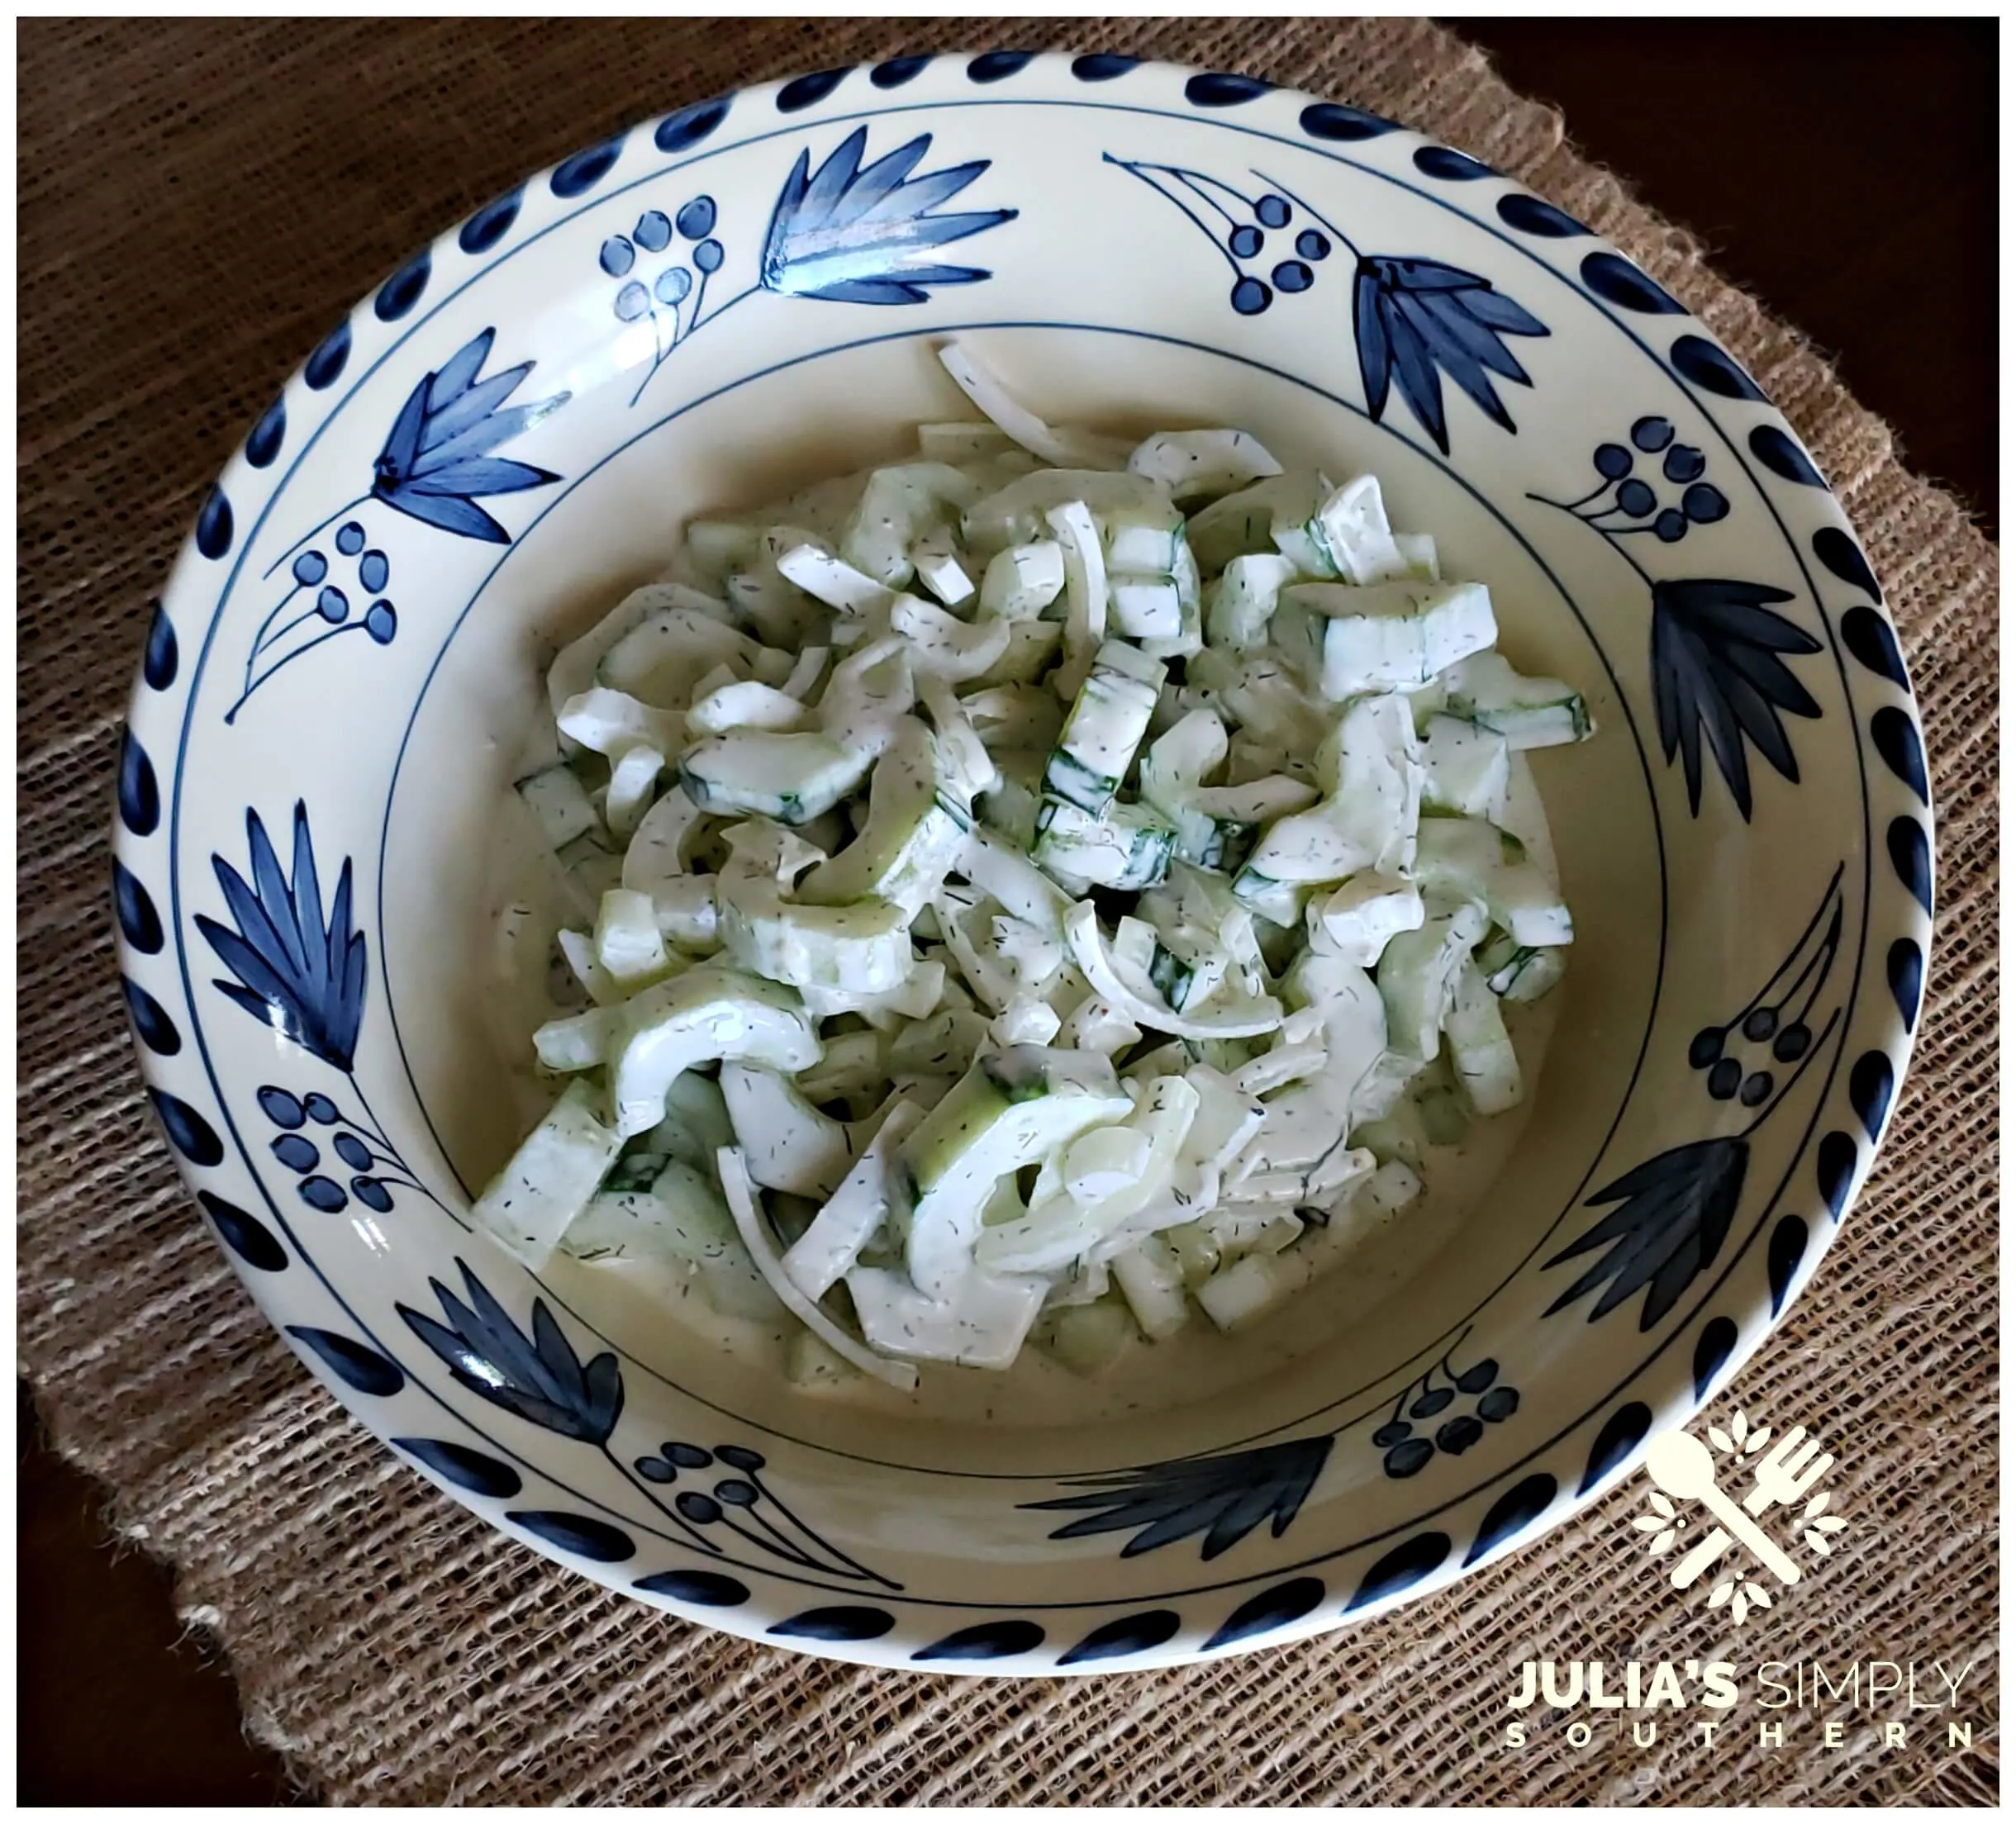 Sour cream cucumber salad with dill. Easy side dish recipe using cucumbers. 